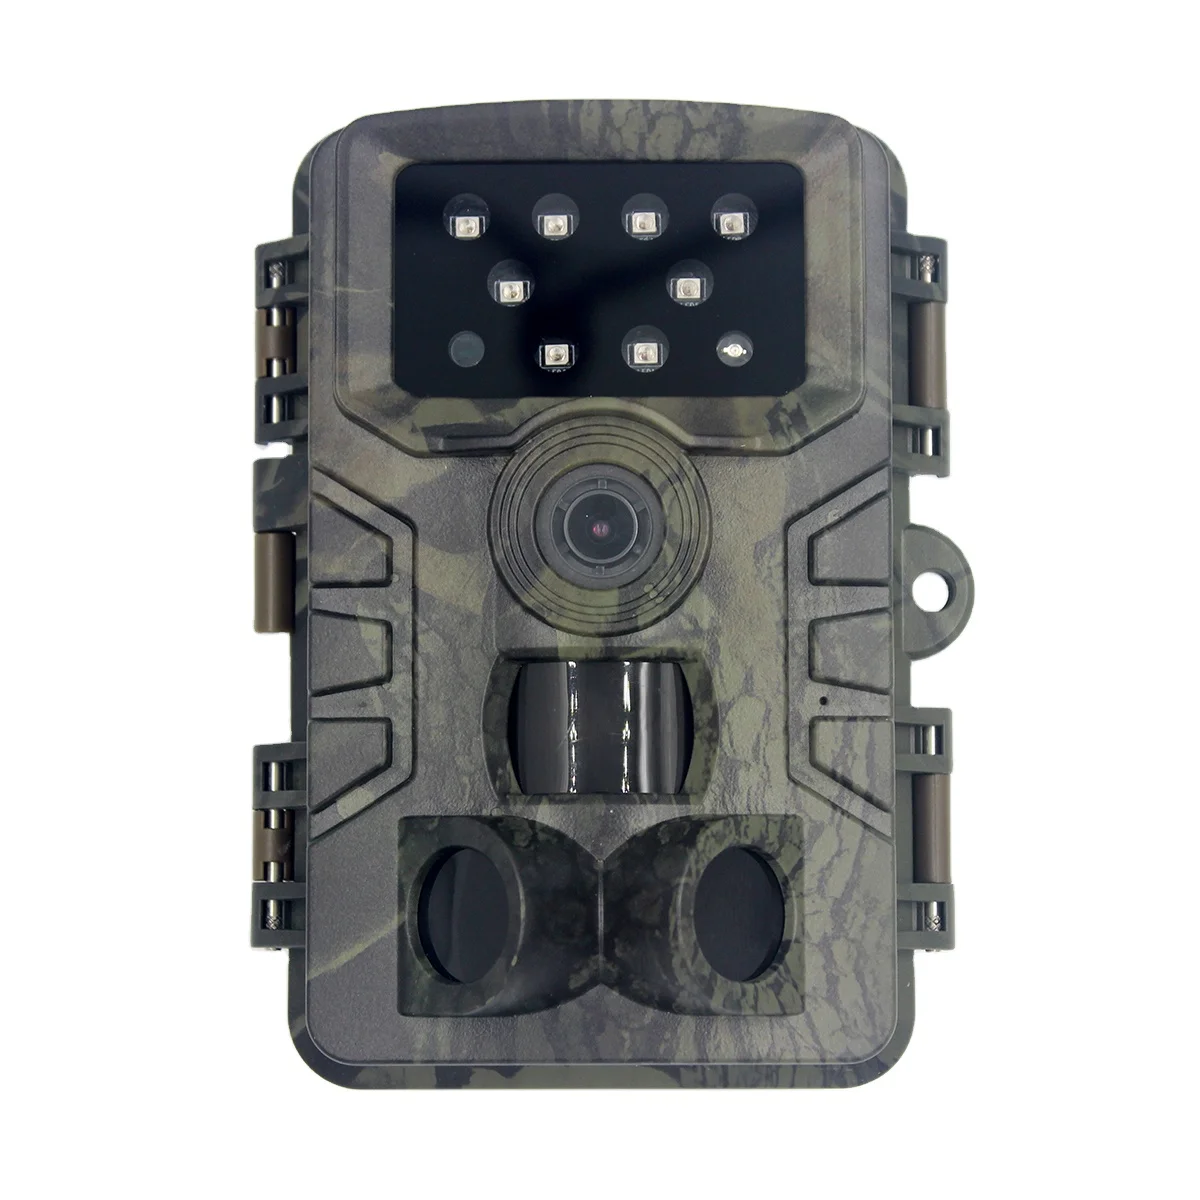 

CM700 Remote Trail Camera 20MP Game Hunting Camera with 38pcs IR LEDs Infrared and IP54 Waterproof for Wildlife Monitoring